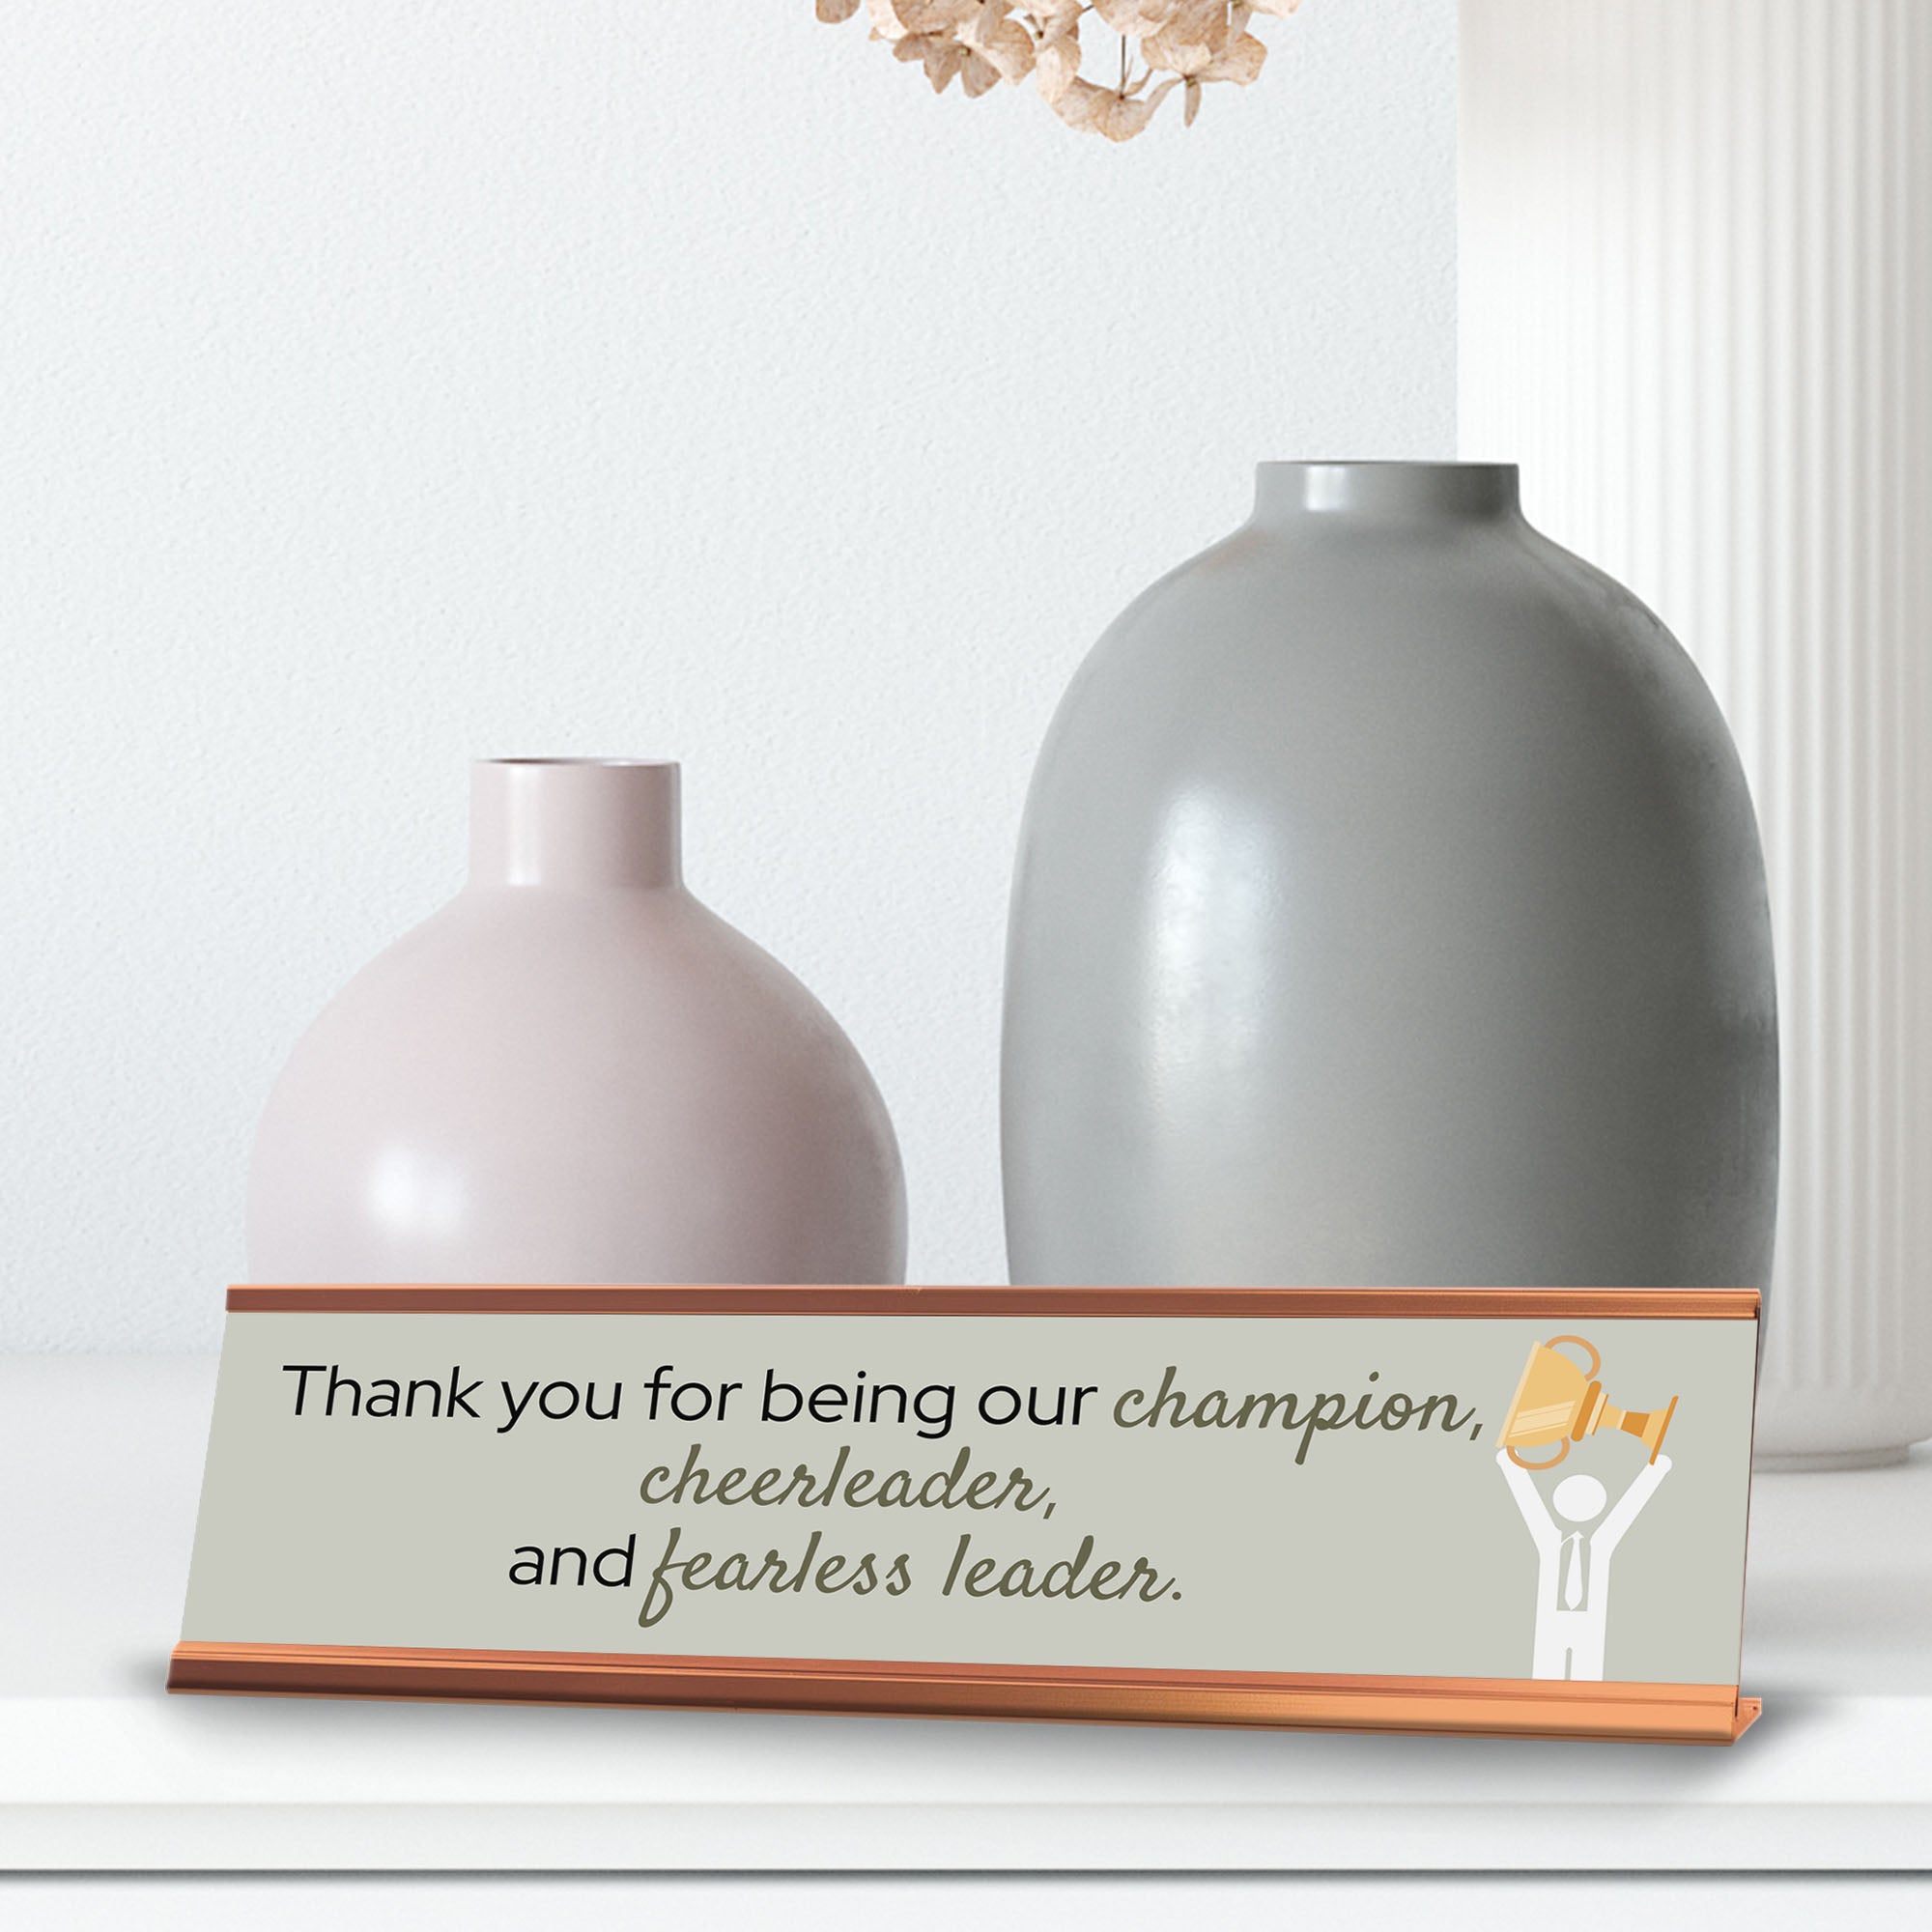 Signs ByLITA Thank You For Being Our Champion, Our Cheerleader, And Our Fearless Leader Gold Frame, Desk Sign (2x8")